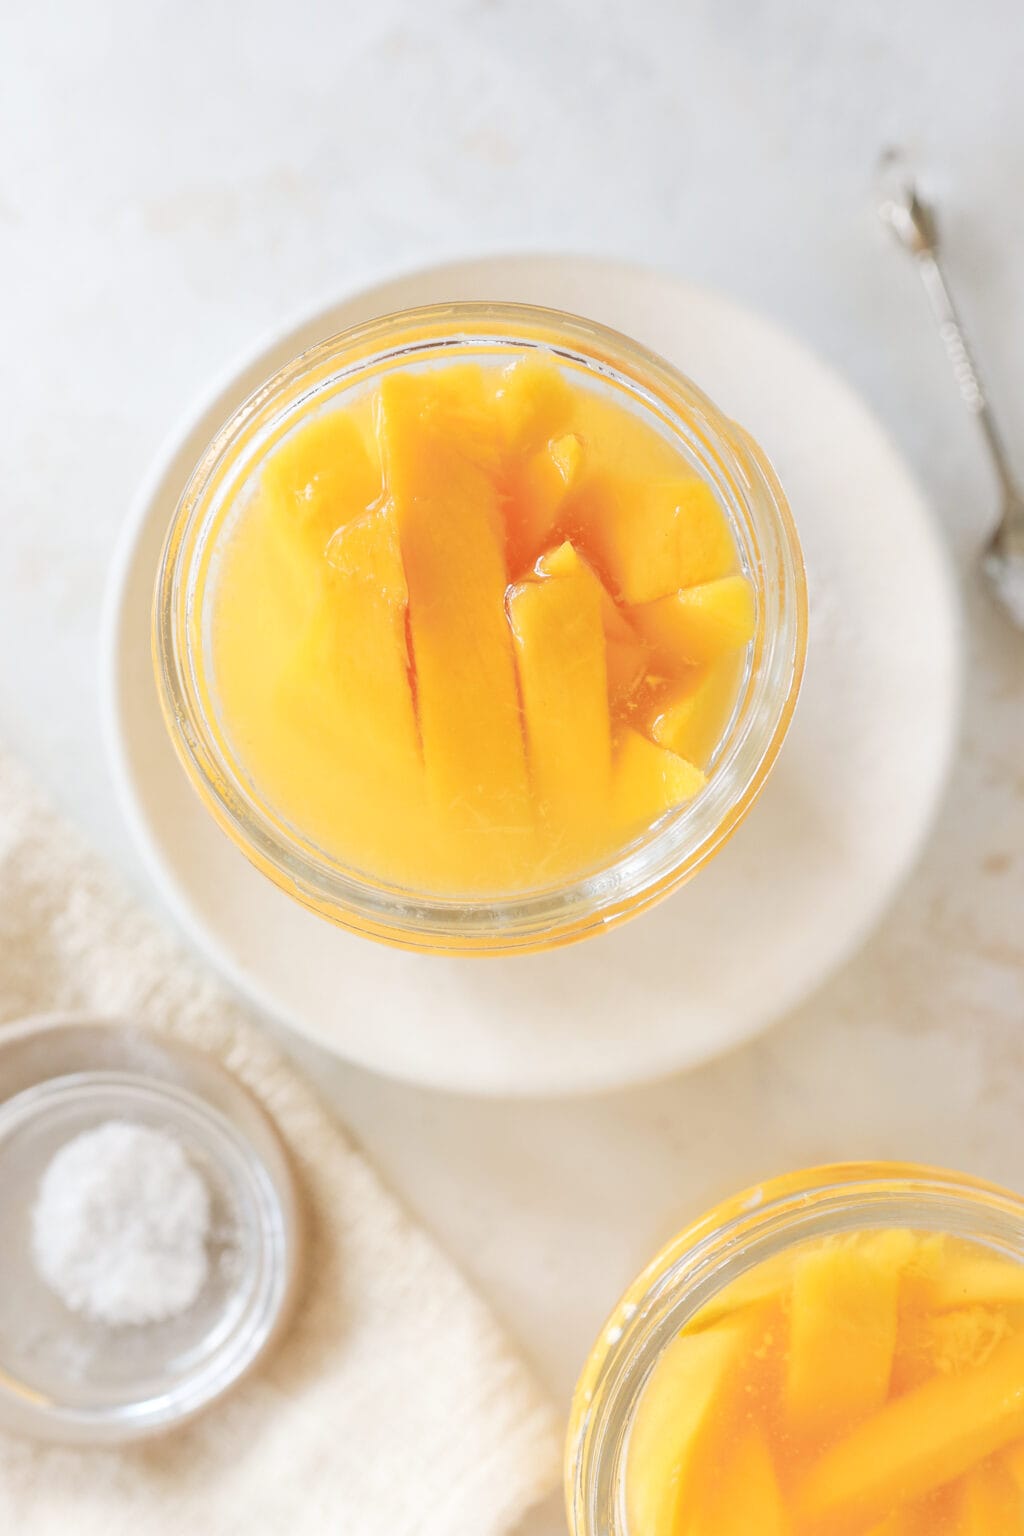 An overhead shot of a jar with a mango in it. The jar has water in it and there is a bowl of salt in the corner.